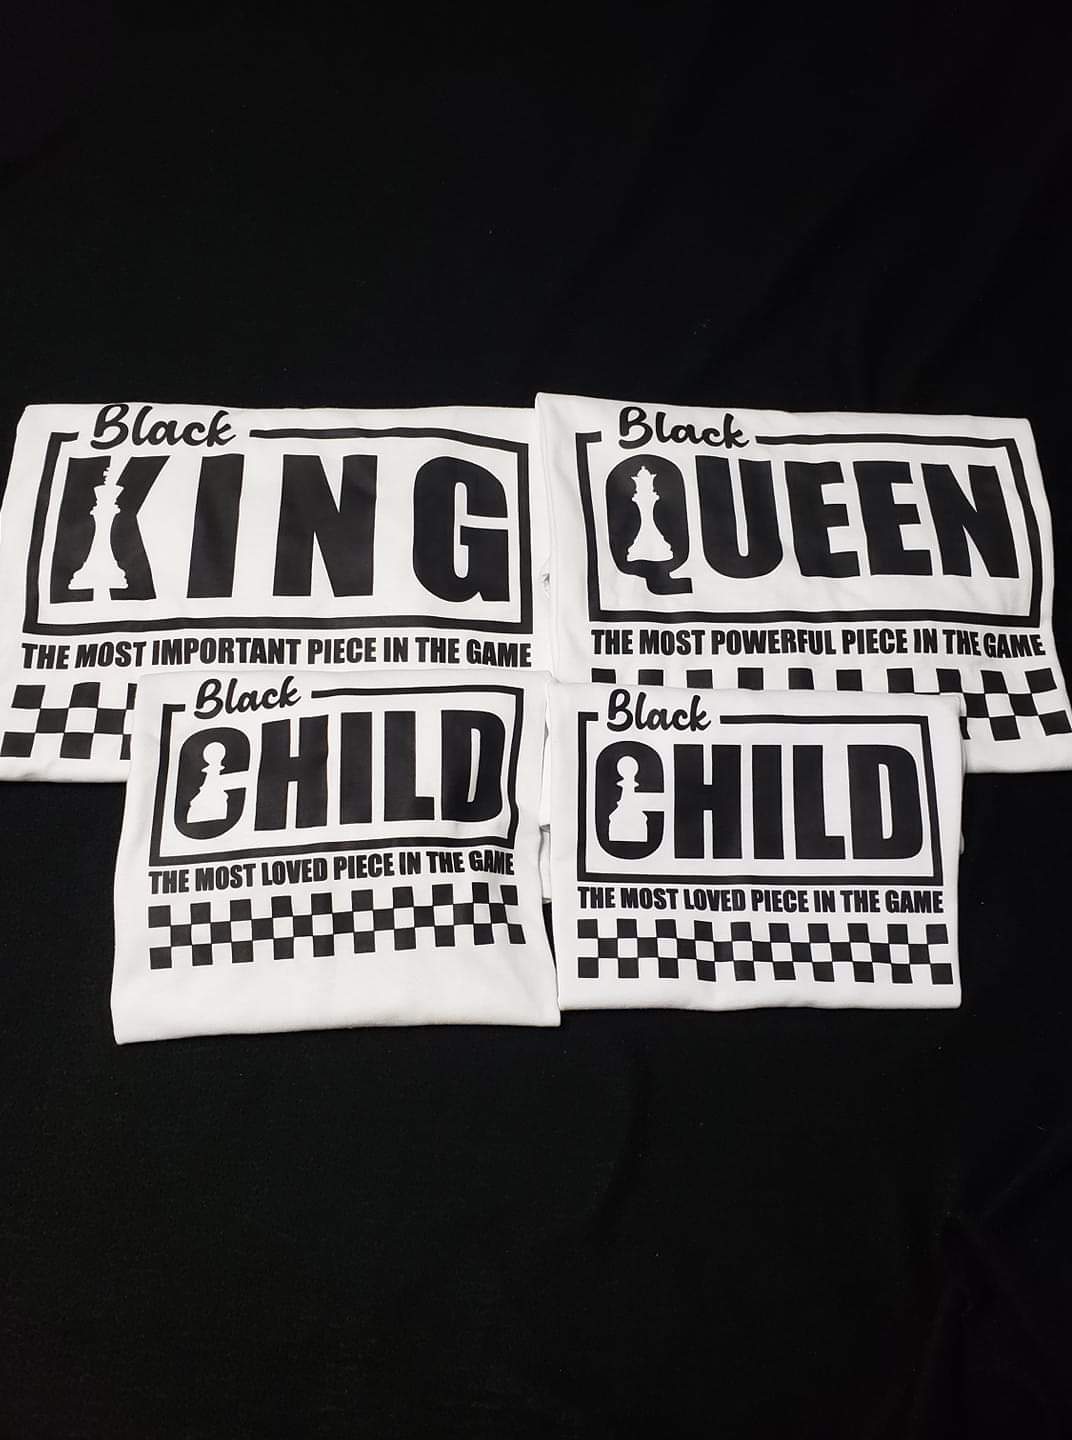 COMBO - Black King, Queen, Child - The Most Important Piece in the Game